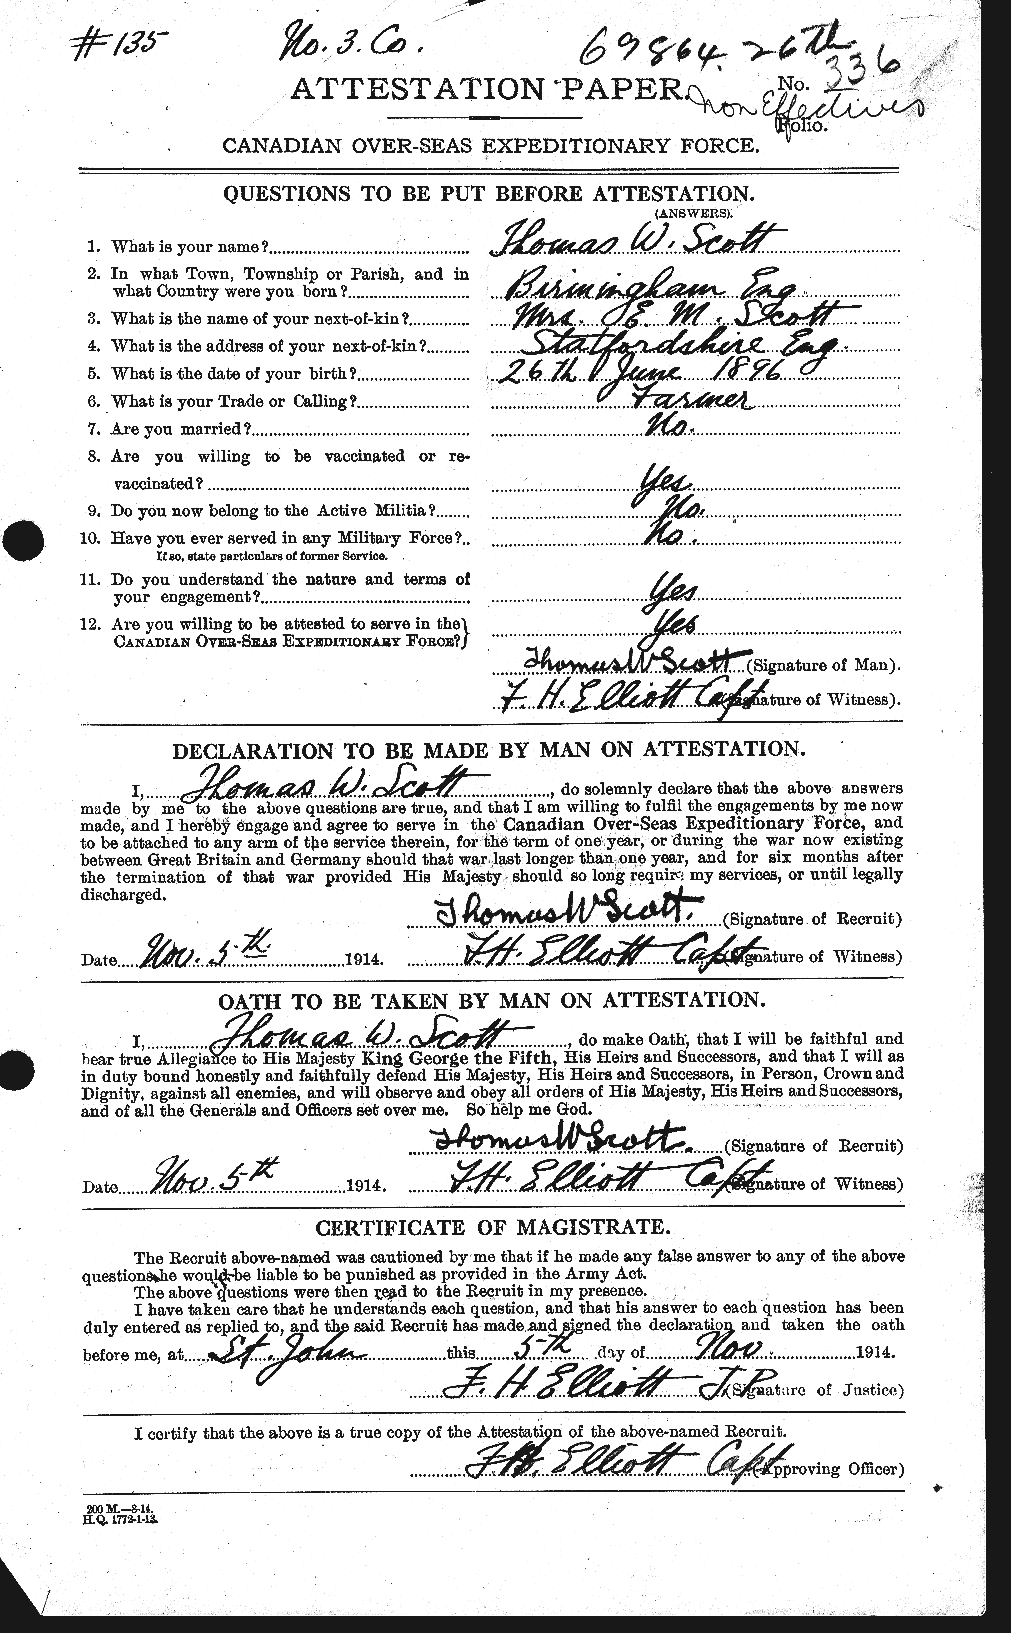 Personnel Records of the First World War - CEF 088218a